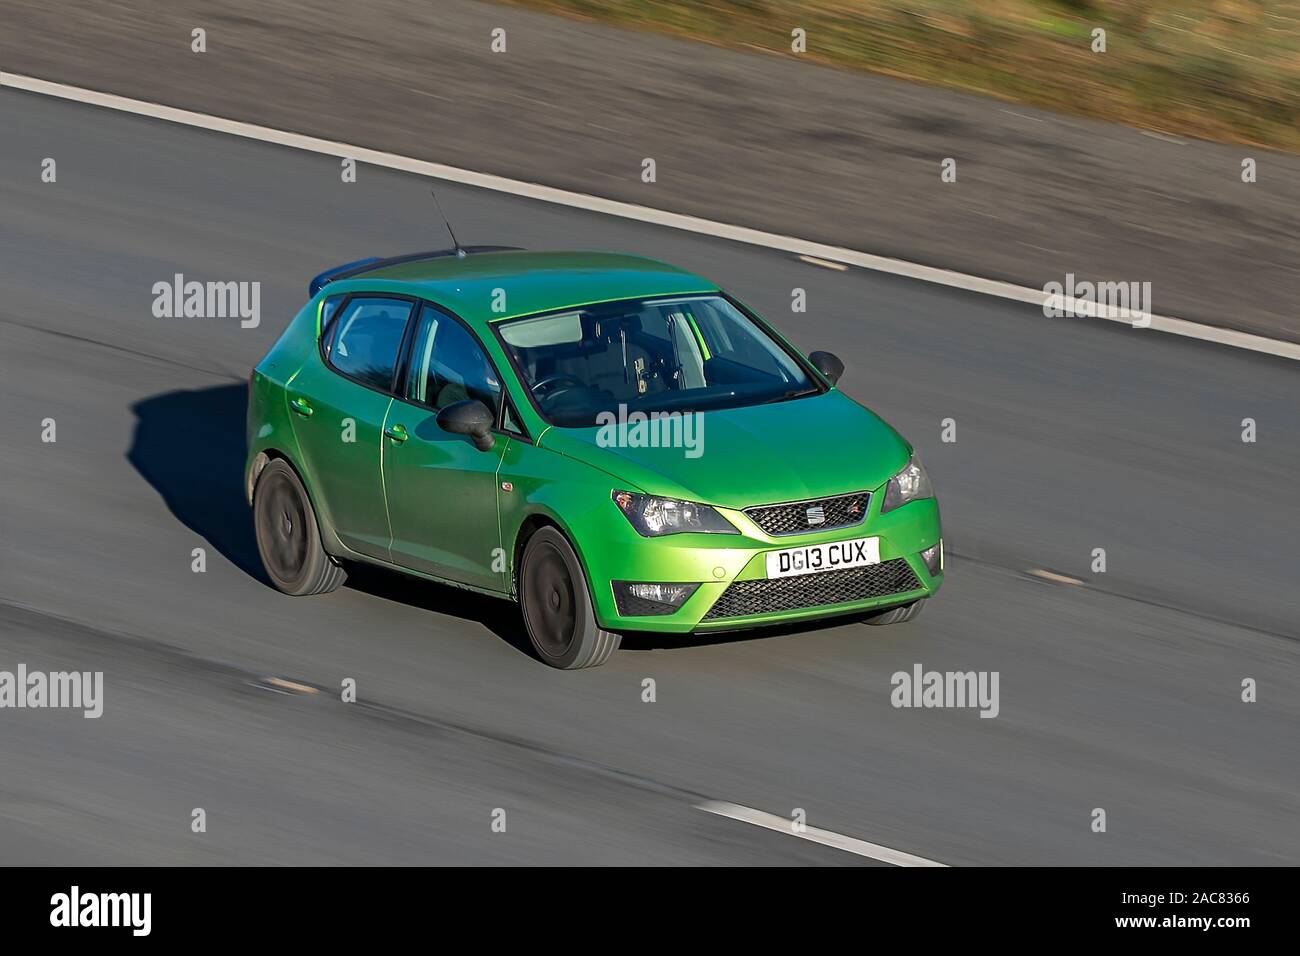 Blurred moving car 2013 SEAT Ibiza Fr Ts traveling at speed on the M61 motorway Slow camera shutter speed vehicle movement Stock Photo